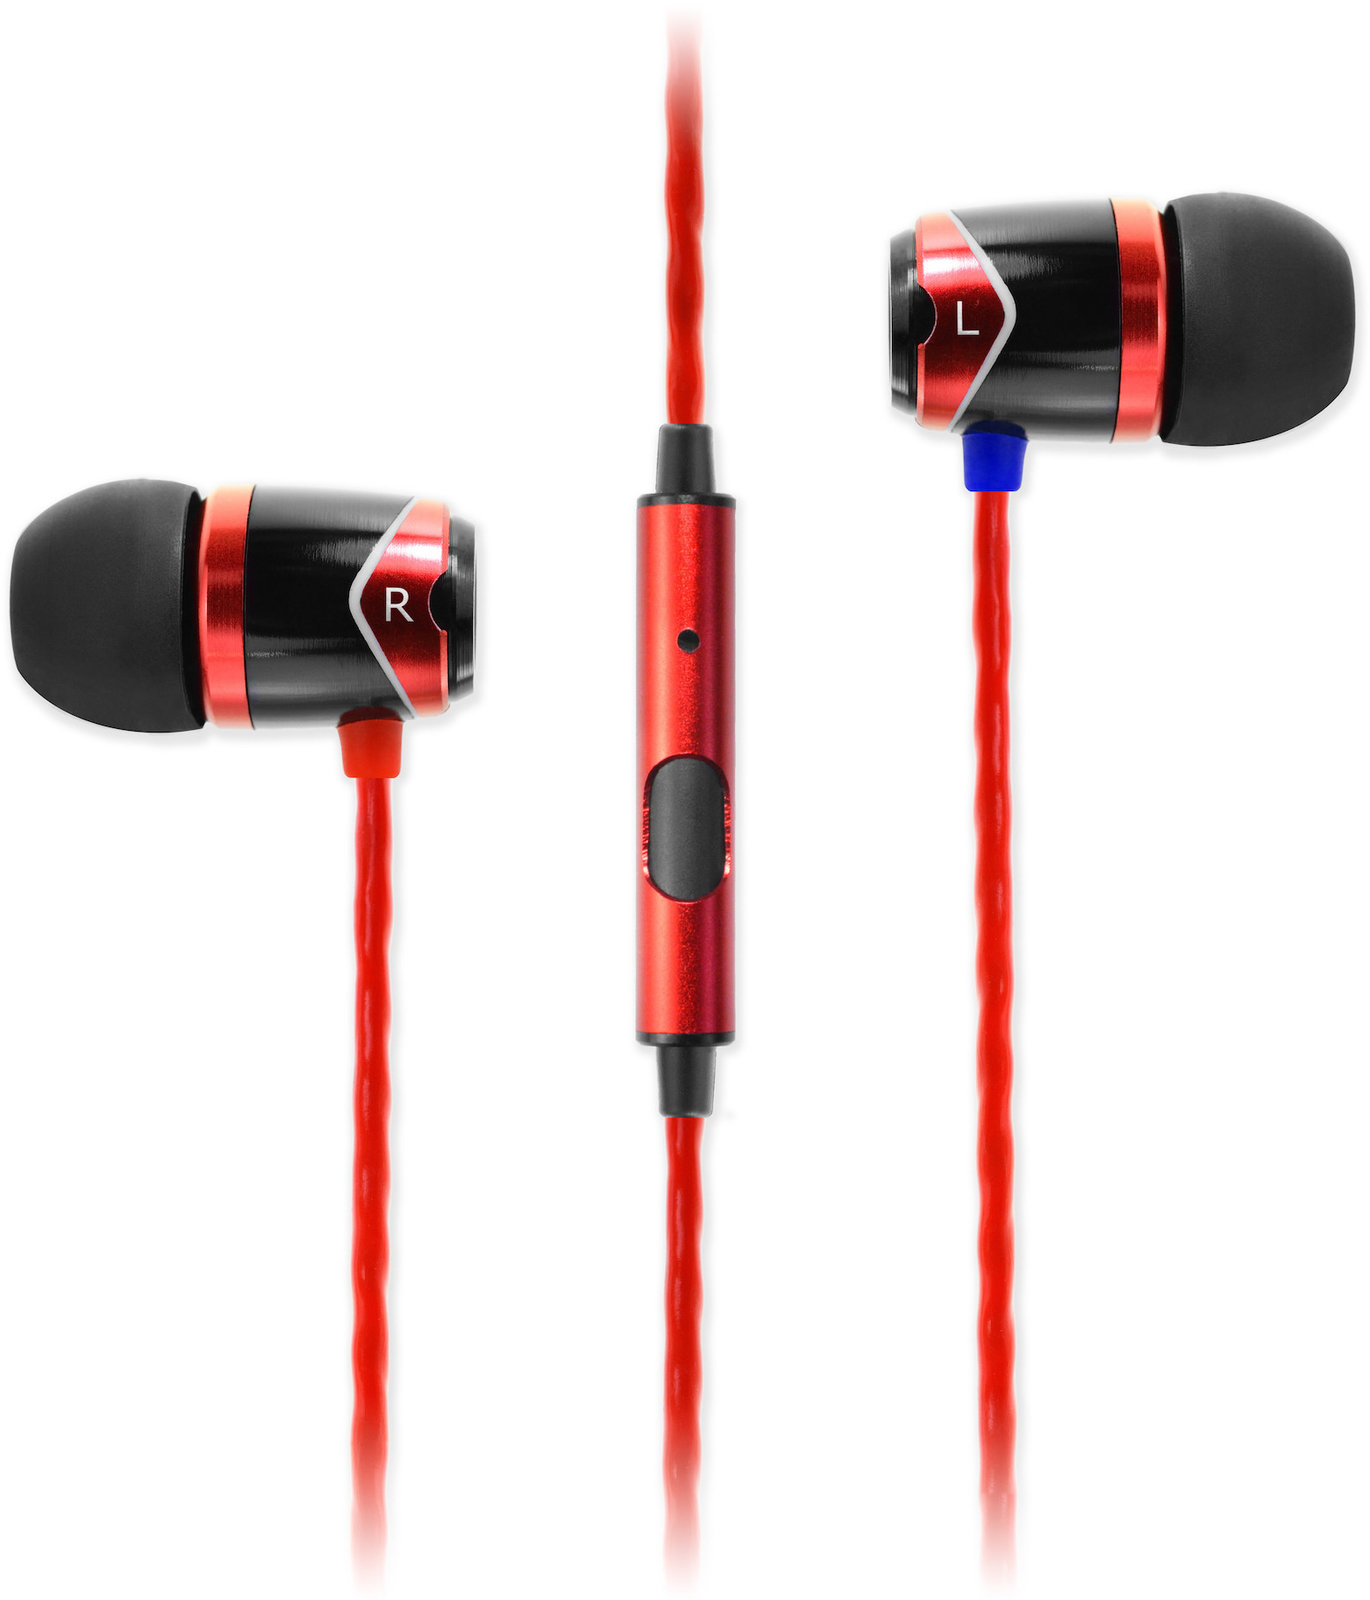 Ecouteurs intra-auriculaires SoundMAGIC E10S Red